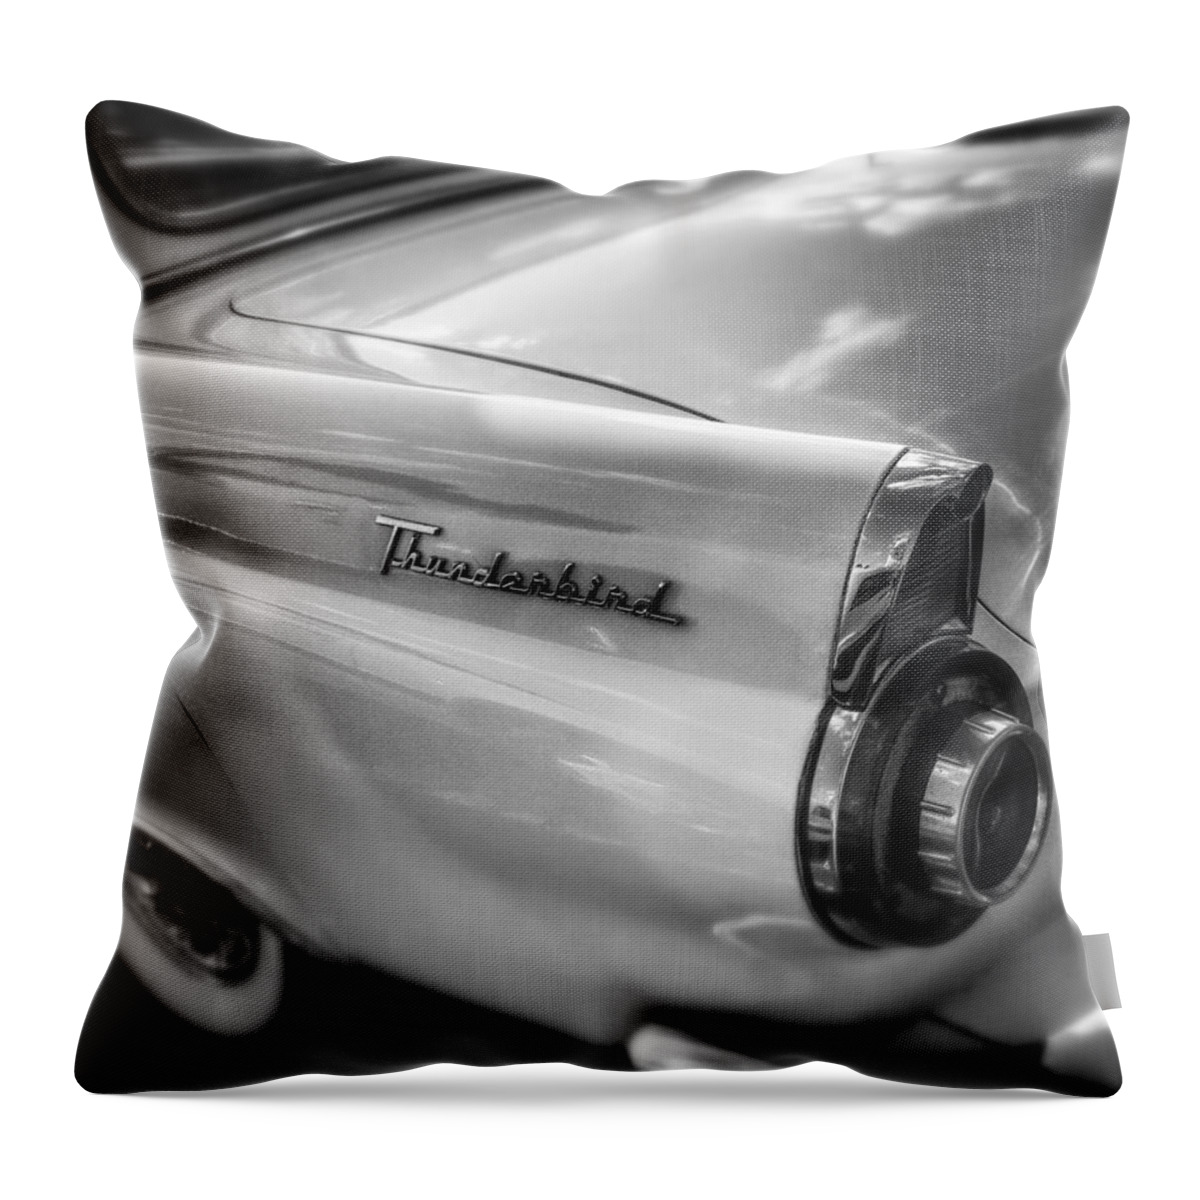 Car Auto Classic Blacknwhite Bnw Ford Thunderbird Photo Scoobydrew81 Antique Refection Light Automobile Road Travel Carshow Fender Wheels Andrew Rhine Carshow Art Reflection Throw Pillow featuring the photograph Ford Thunderbird BW 1 by Andrew Rhine